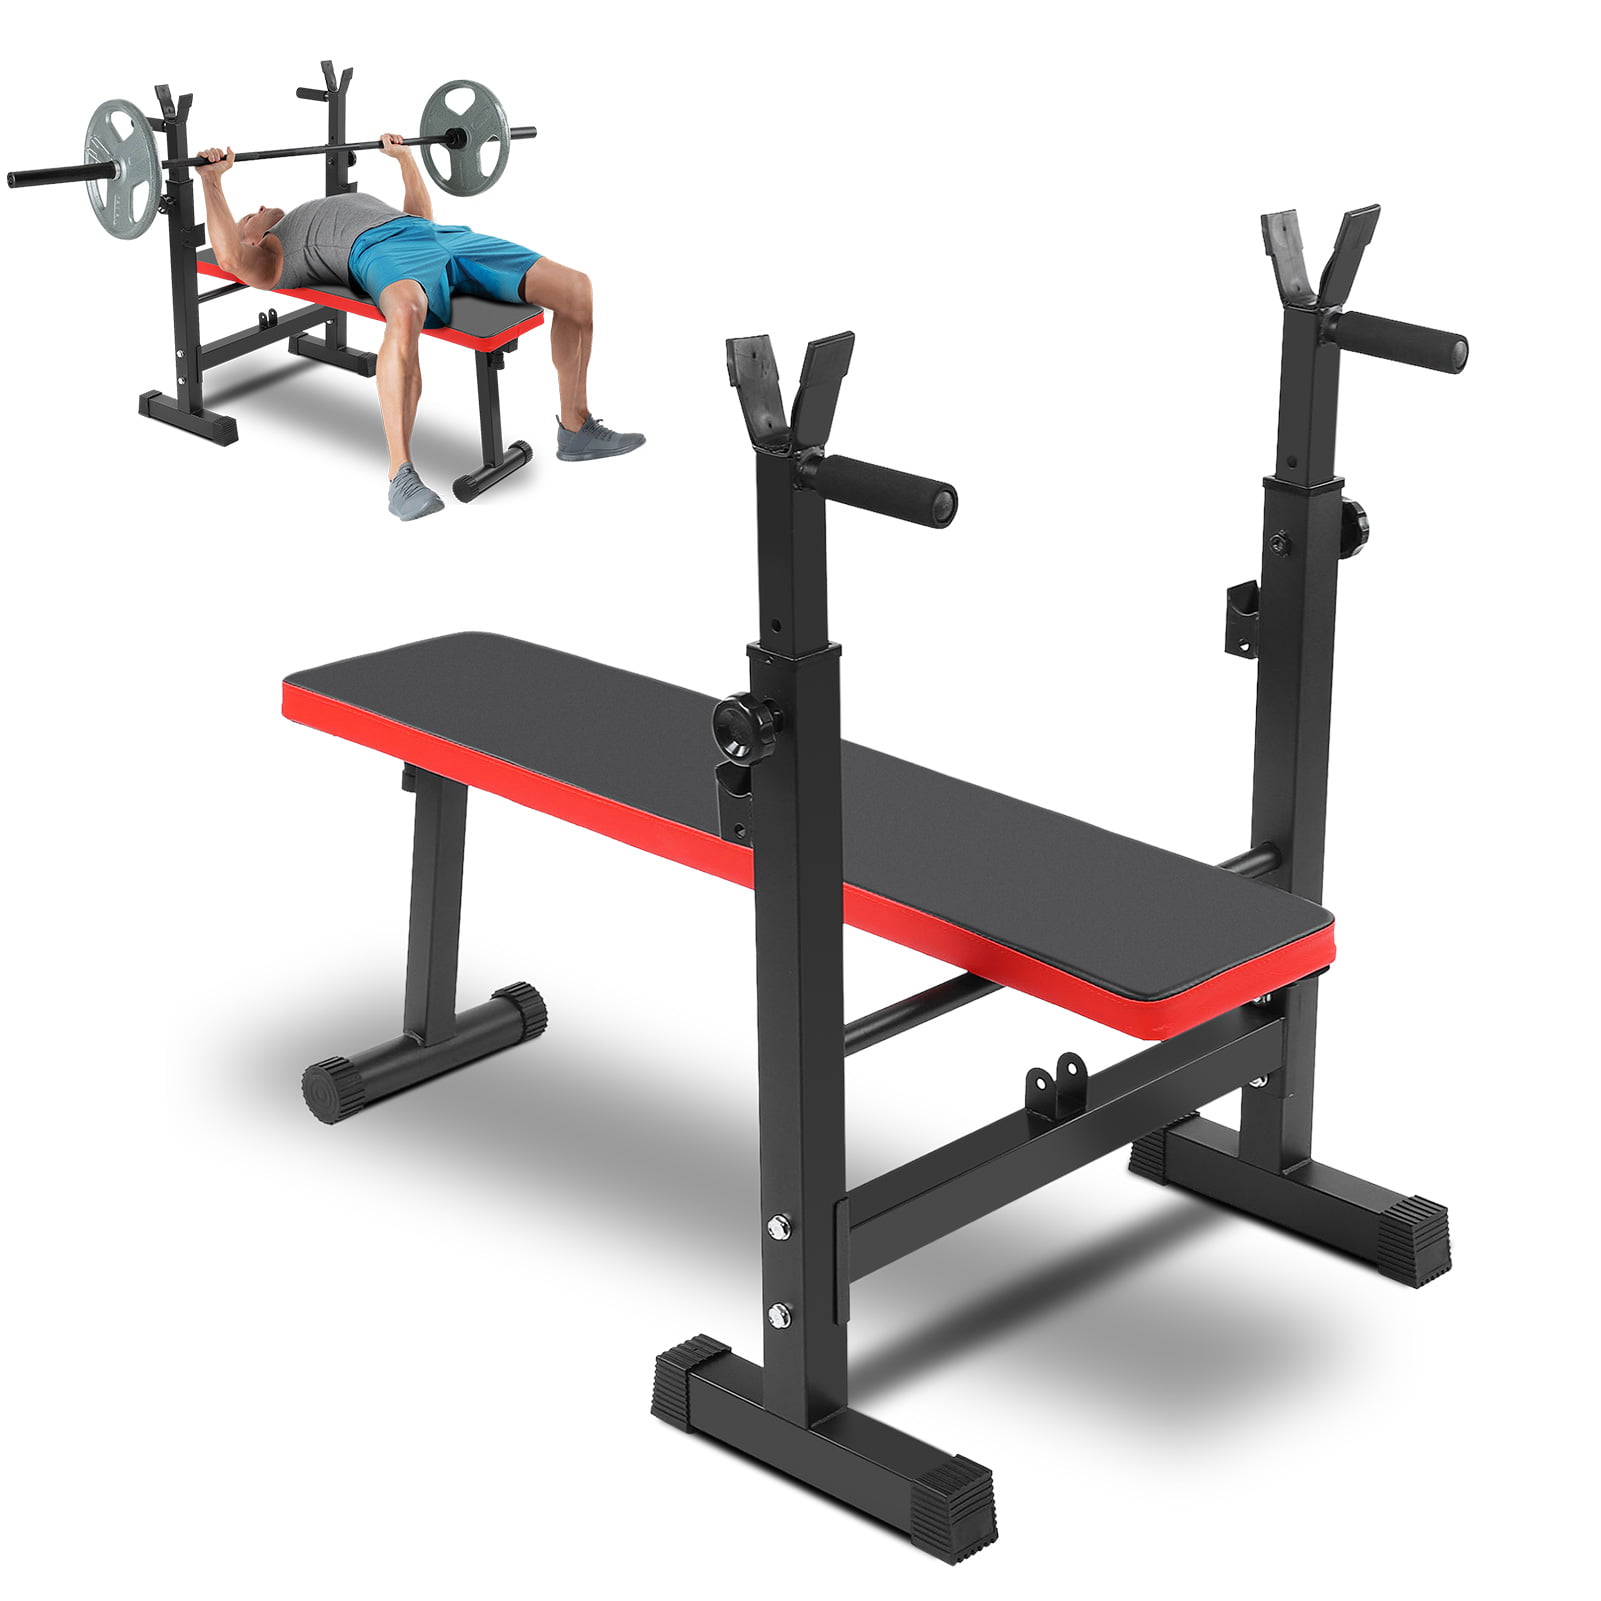 Details about   GYM Fitness Dumbbell Weight Bench Barbell Lifting Folding Adjustable Bench HOT